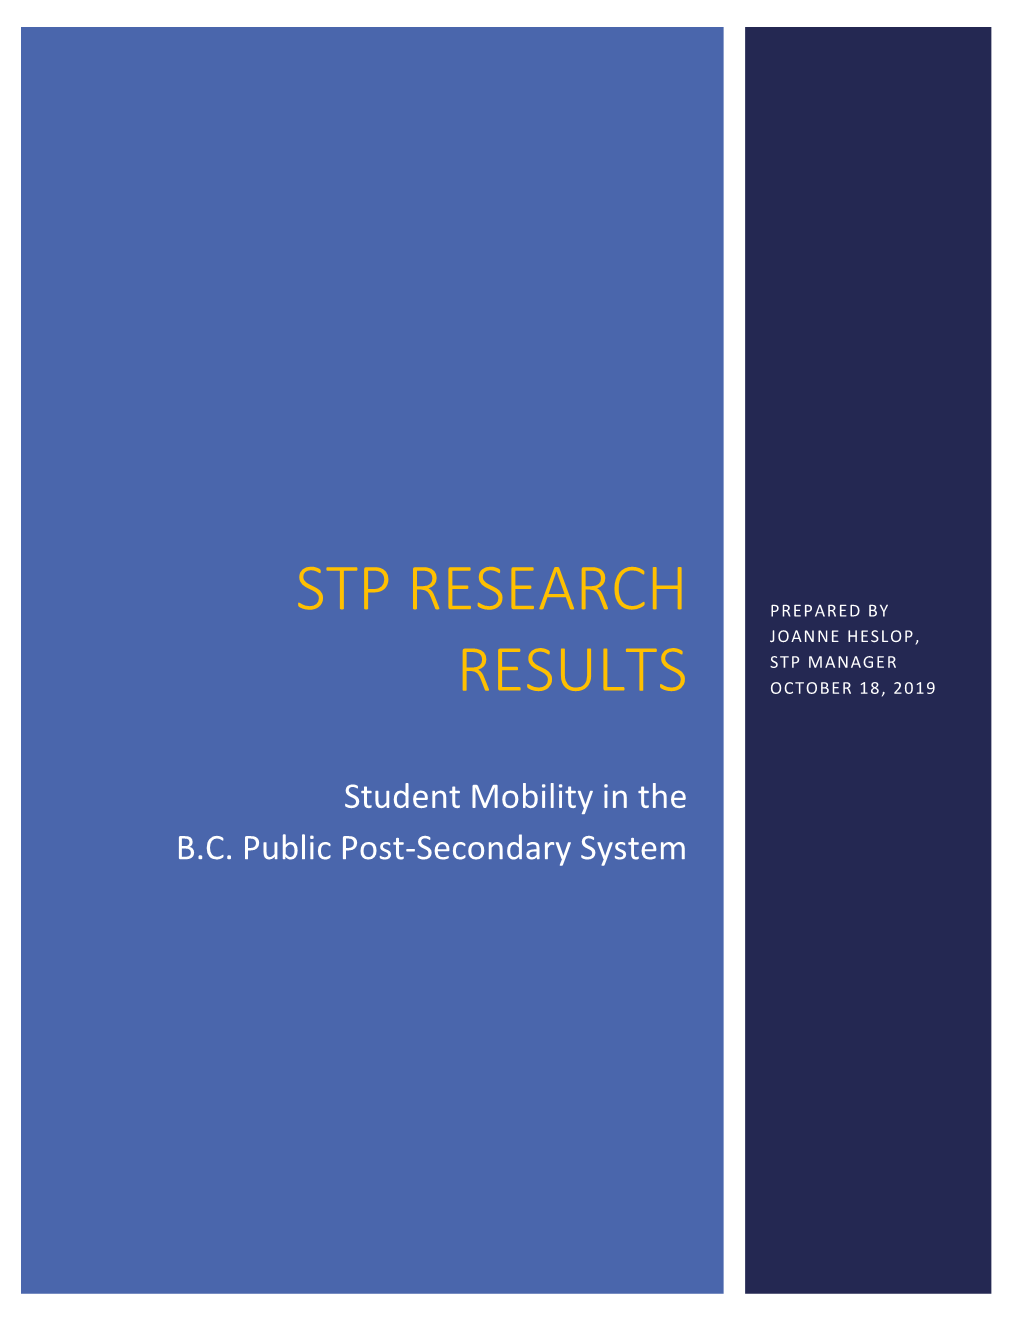 Stp Research Results October 18, 2019